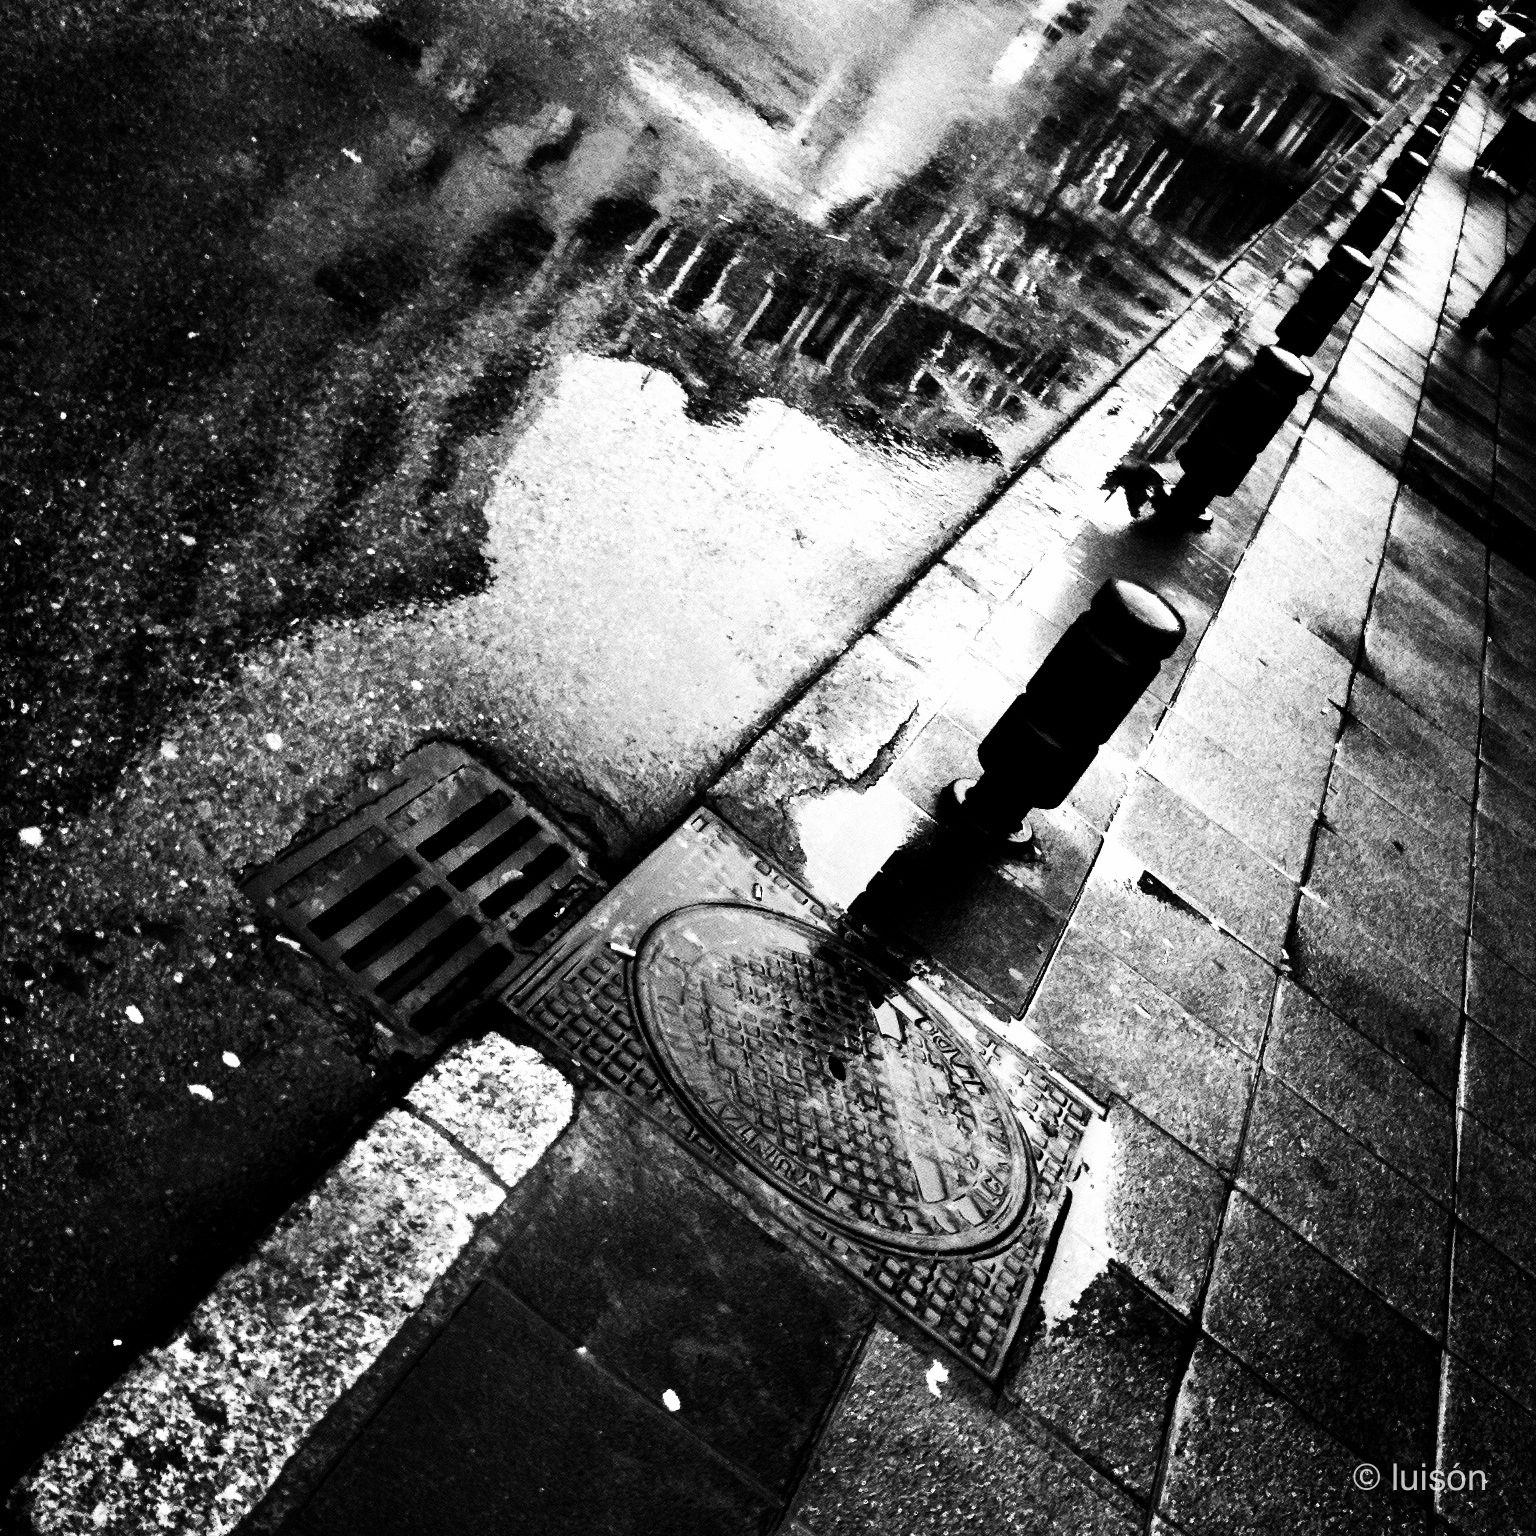 Luisón: Reflections on puddles / Reflejos en charcos. March 2011